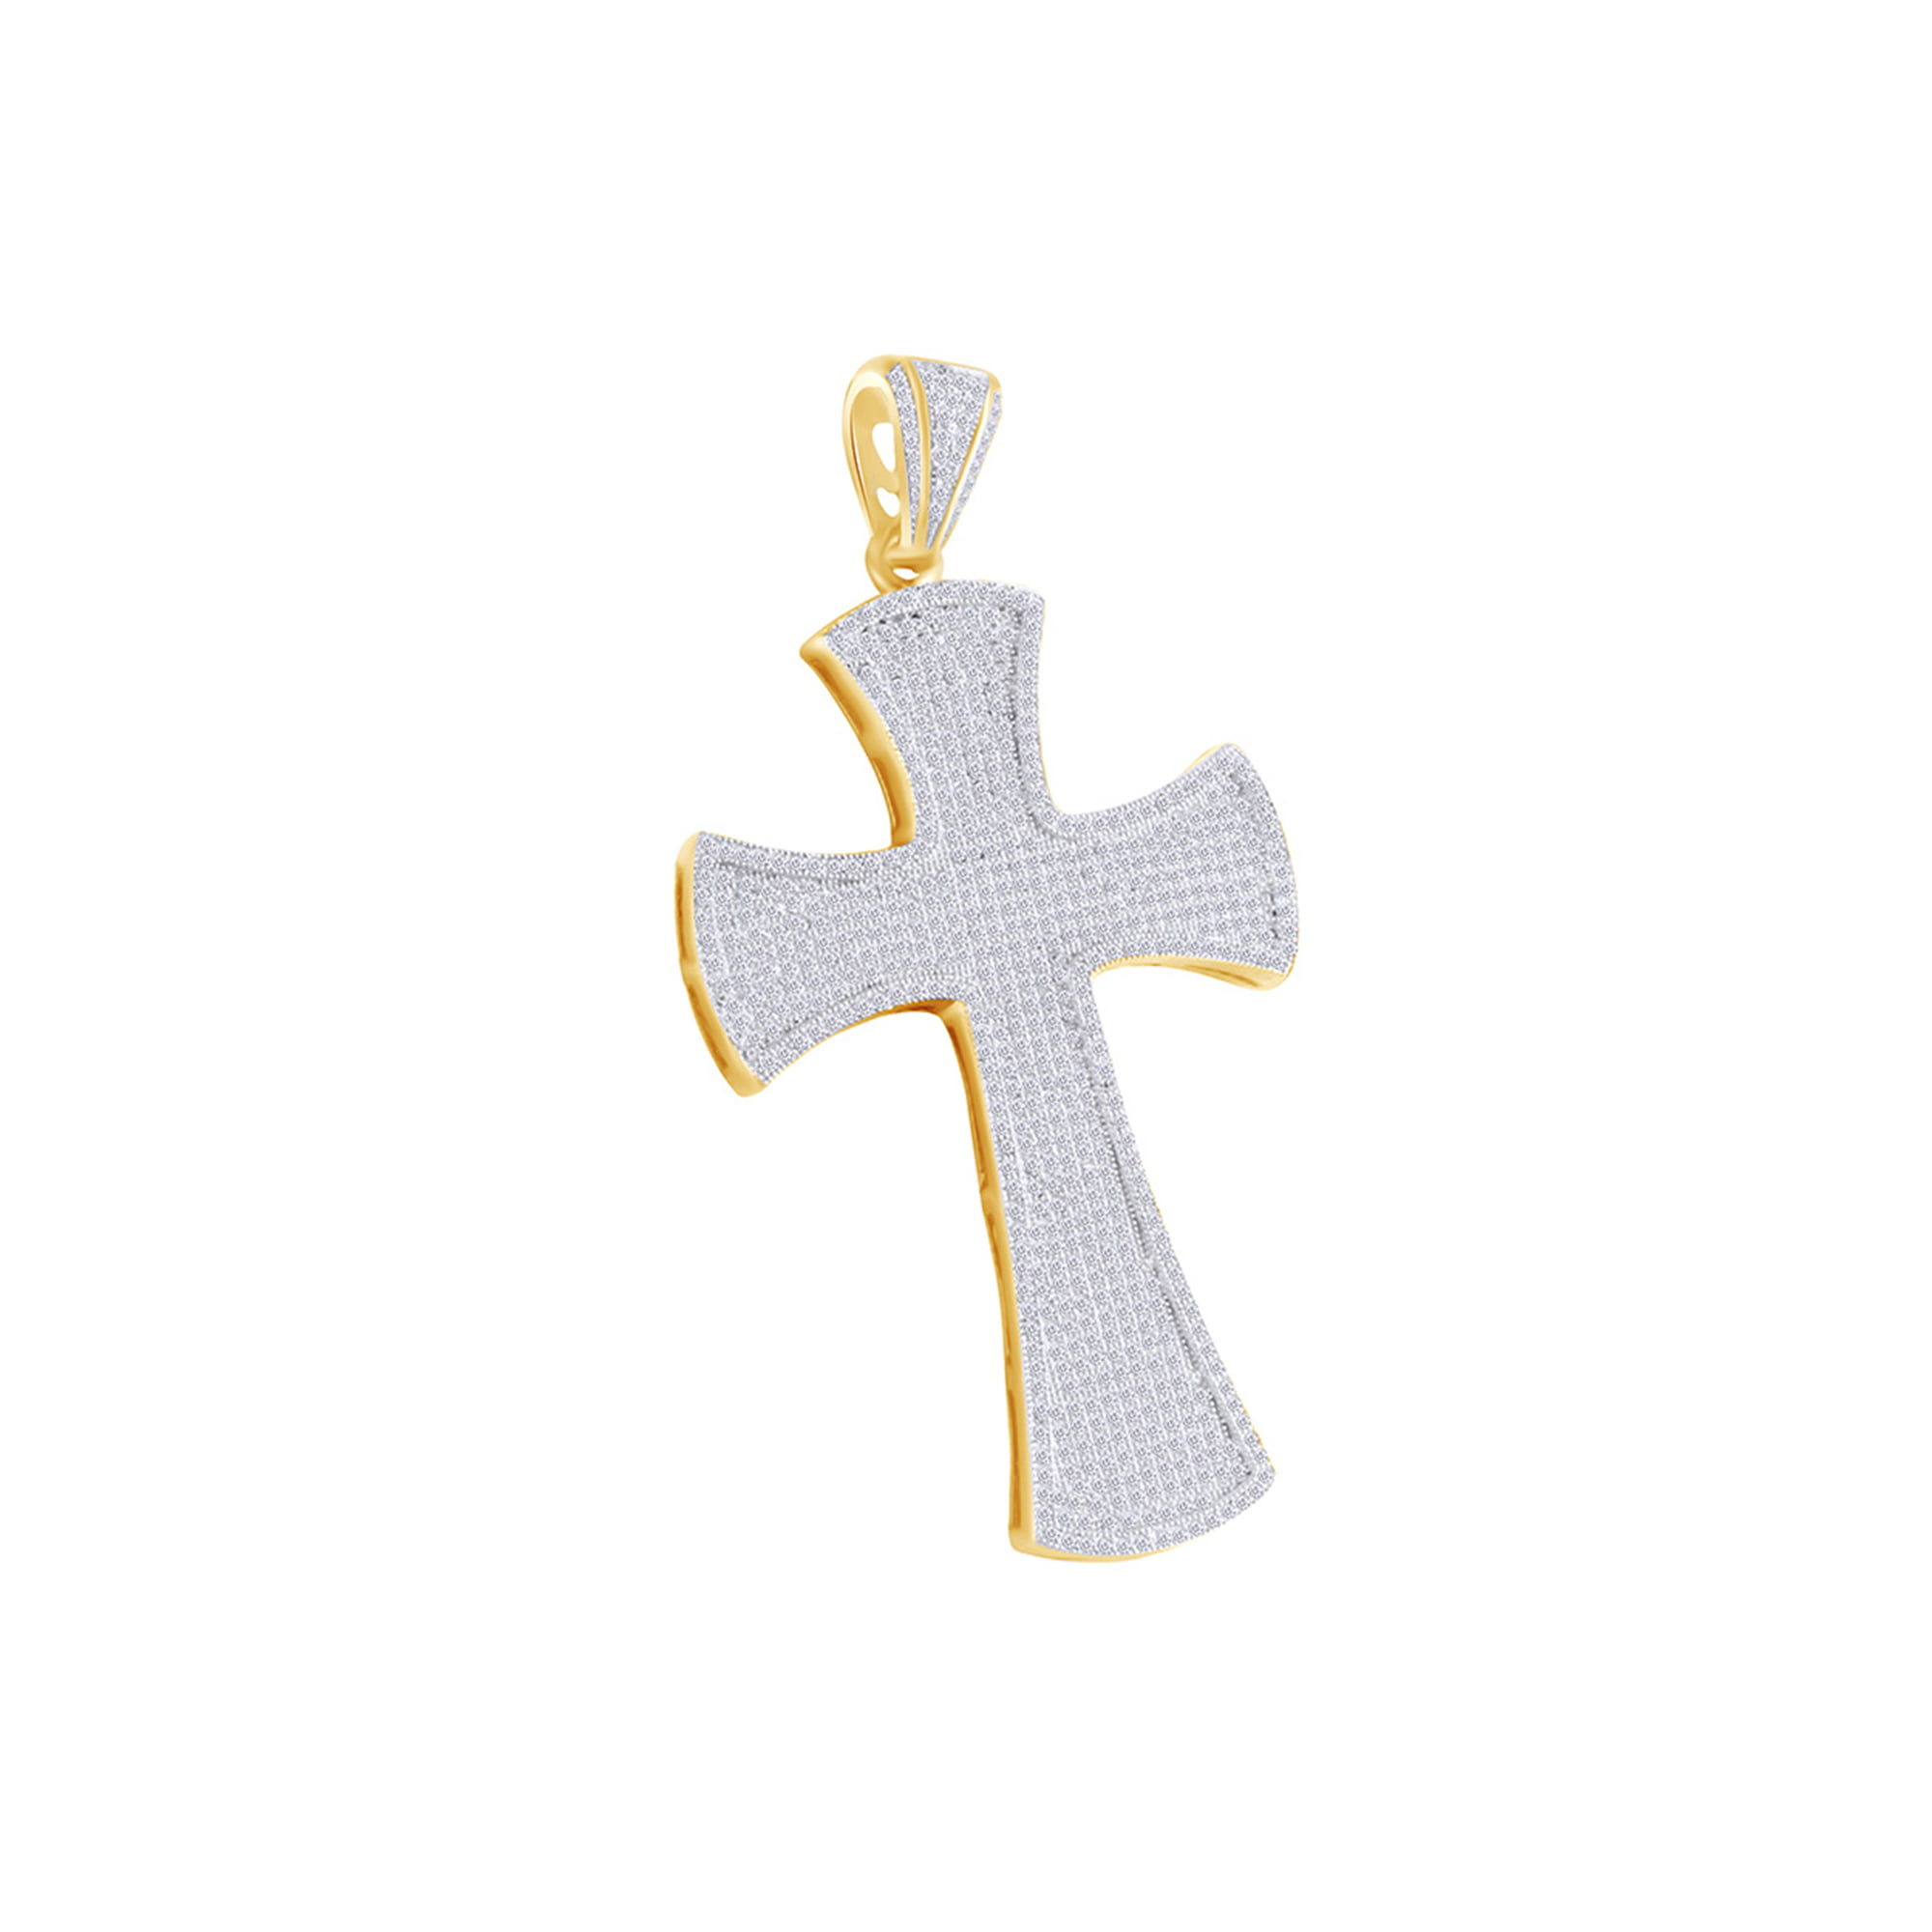 Details about  / 10KT Yellow White Gold Cross Religious Charm Pendant Mens Womens Small Tiny